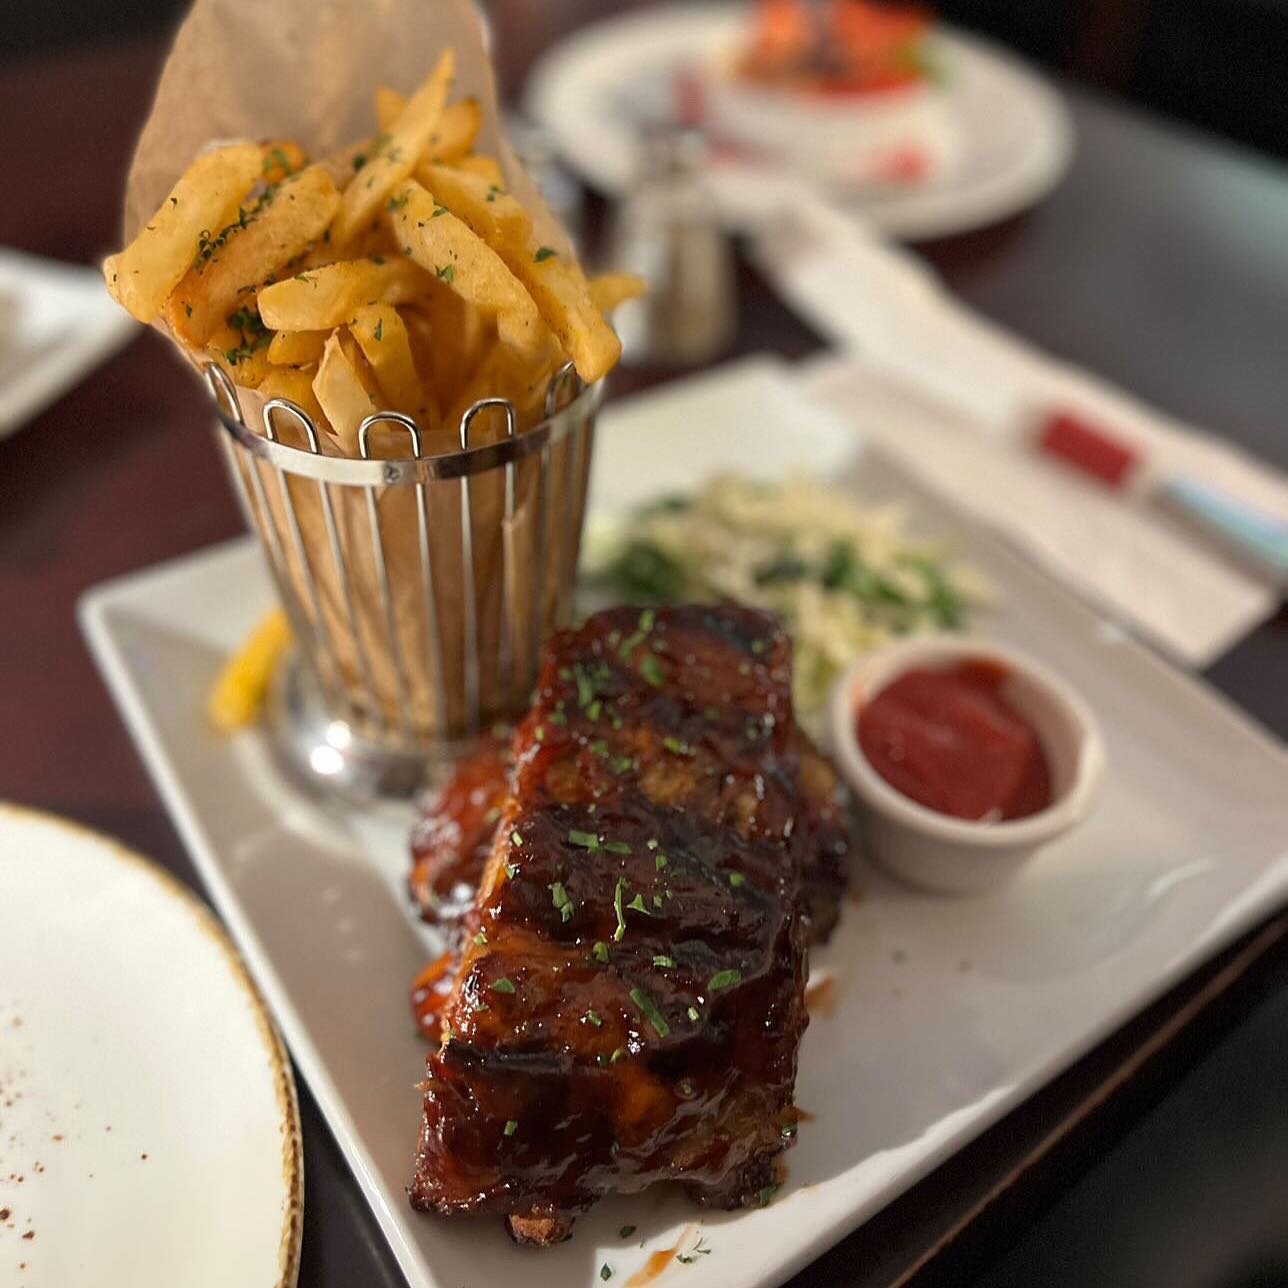 Start your week off right with our delicious Slow Roasted BBQ Ribs 😍😍😍 One of our top sellers! #engineco28 #enginecono28 #slowroastedbbqribs #bbqribs #dtla #dtlafoodie #dtlarestaurant